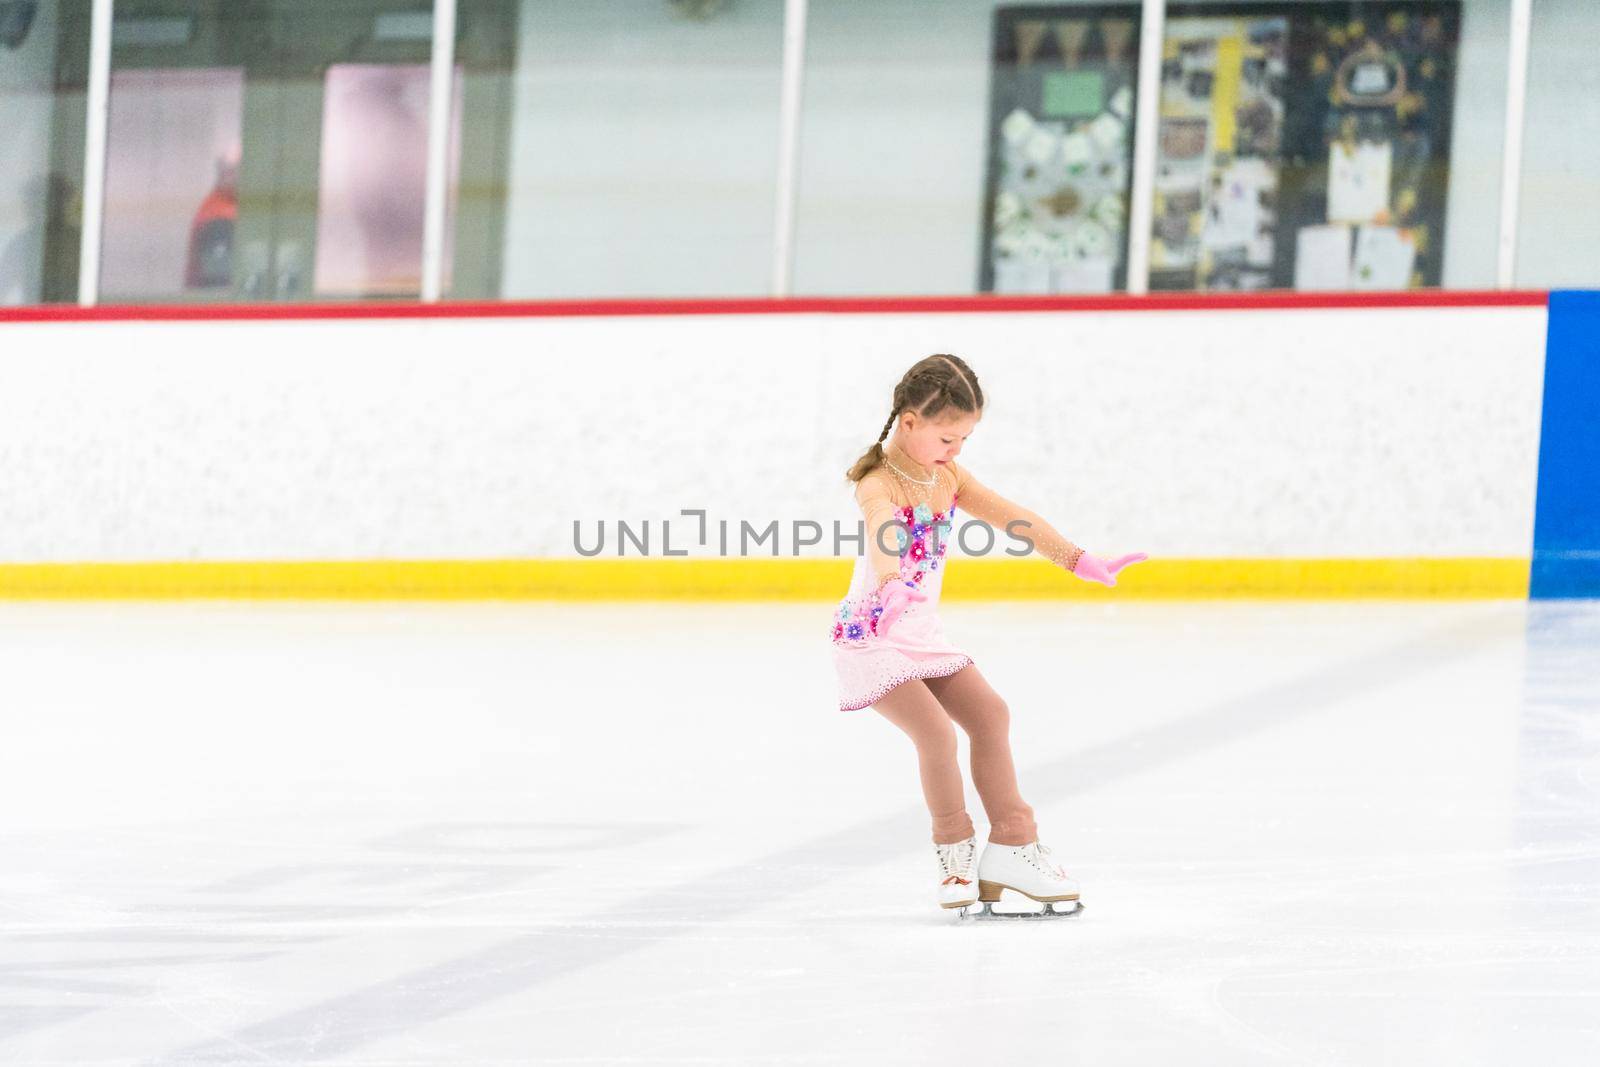 Little girl practicing figure skating on an indoor ice skating rink.